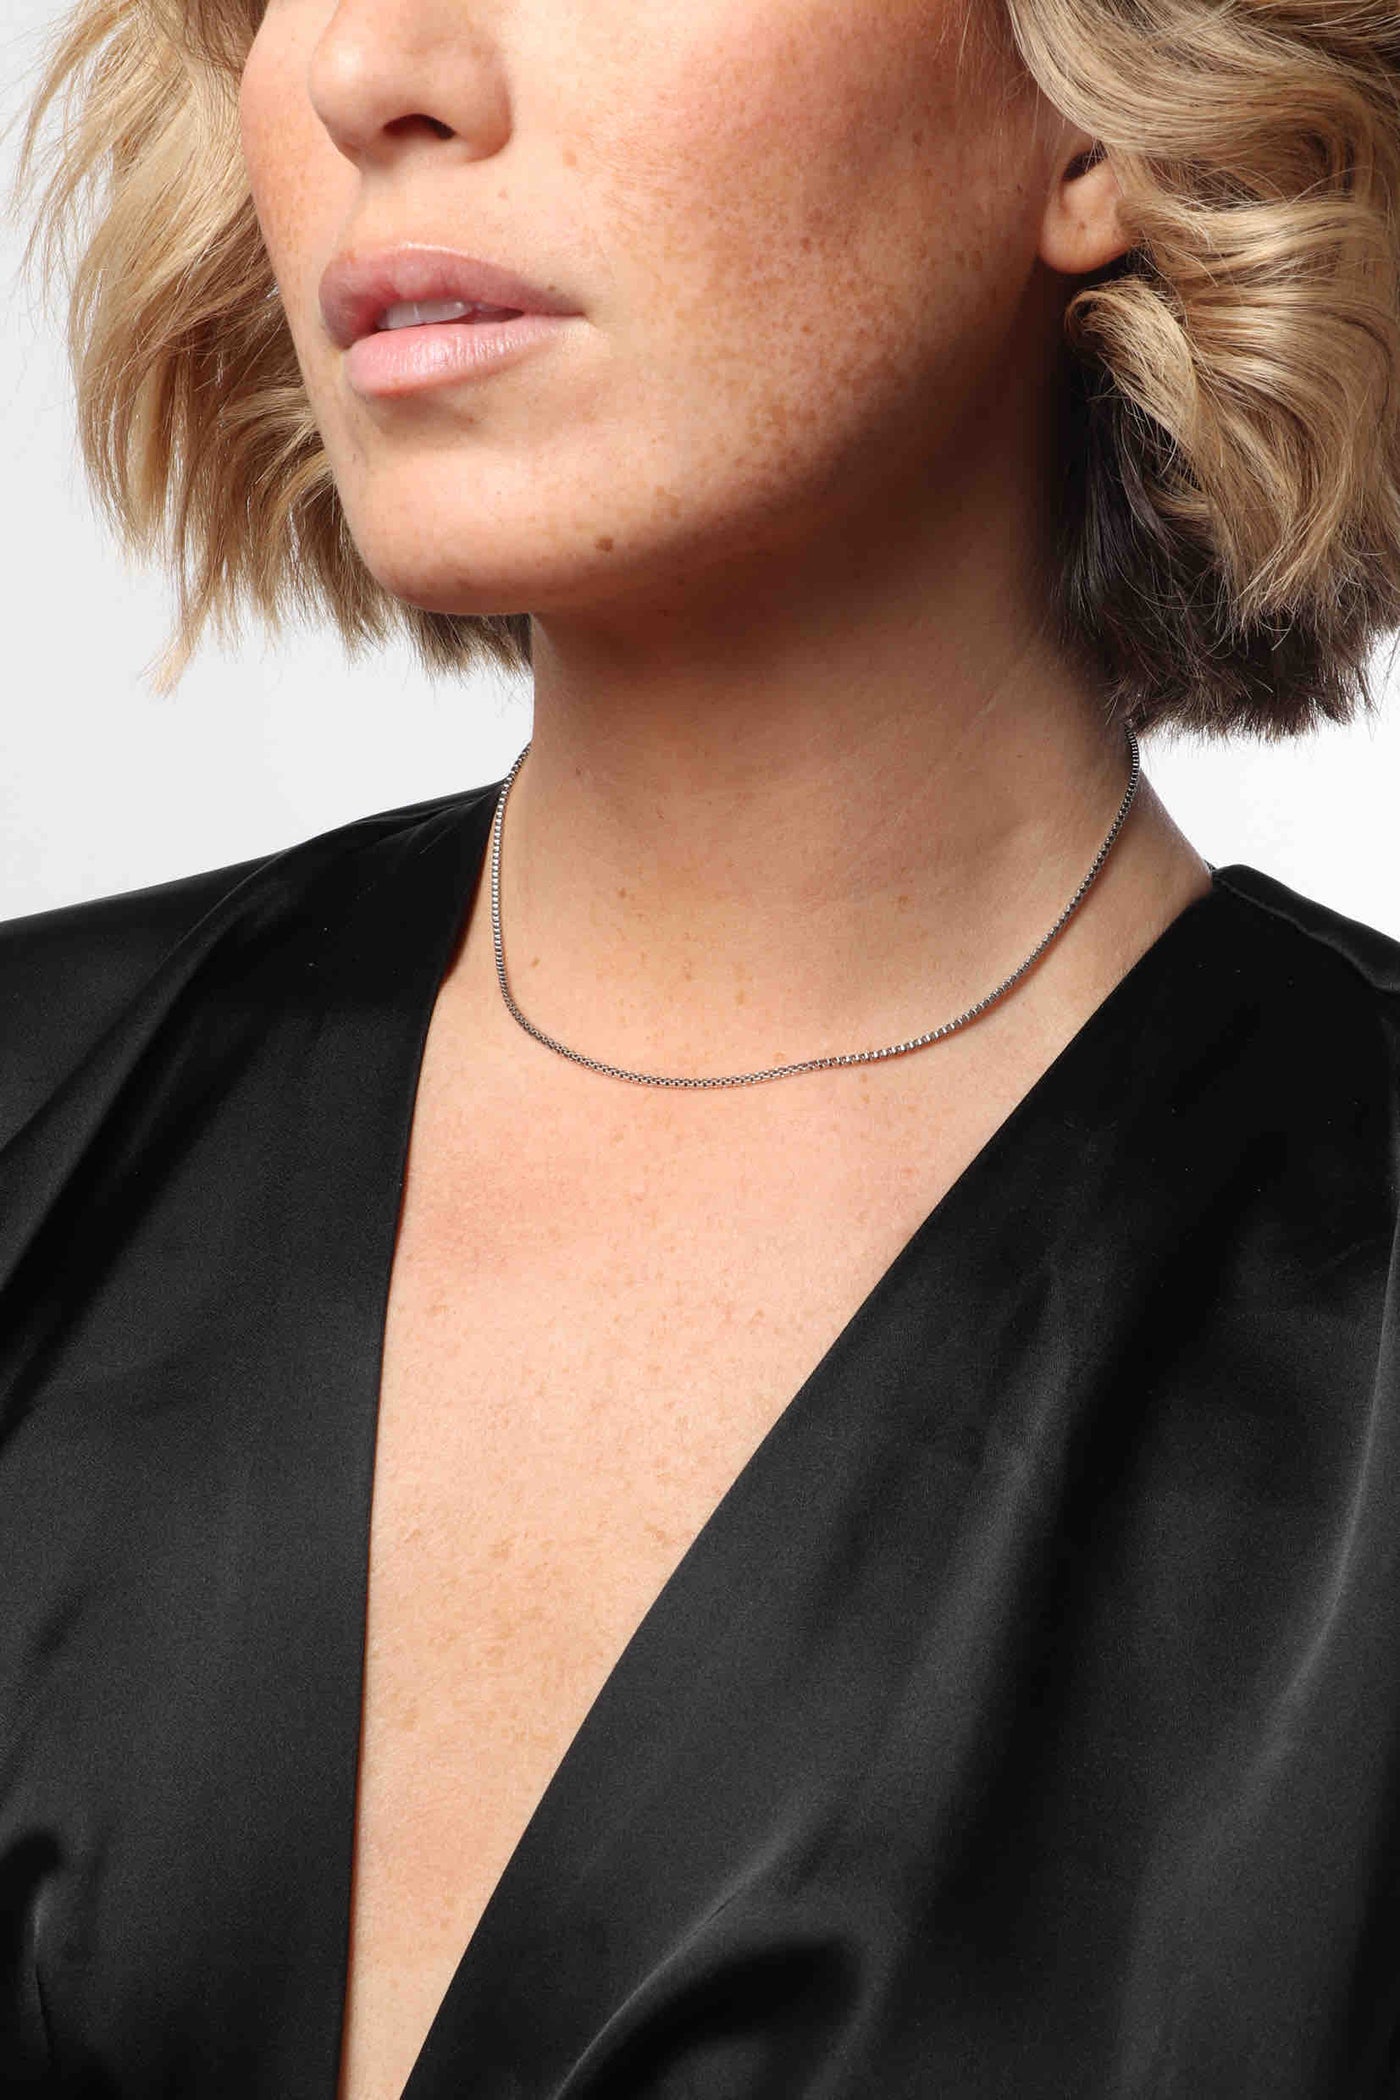 Marrin Costello wearing Marrin Costello Jewelry Nile Choker delicate dainty box link chain with lobster clasp closure and extender. Waterproof, sustainable, hypoallergenic. Polished stainless steel.